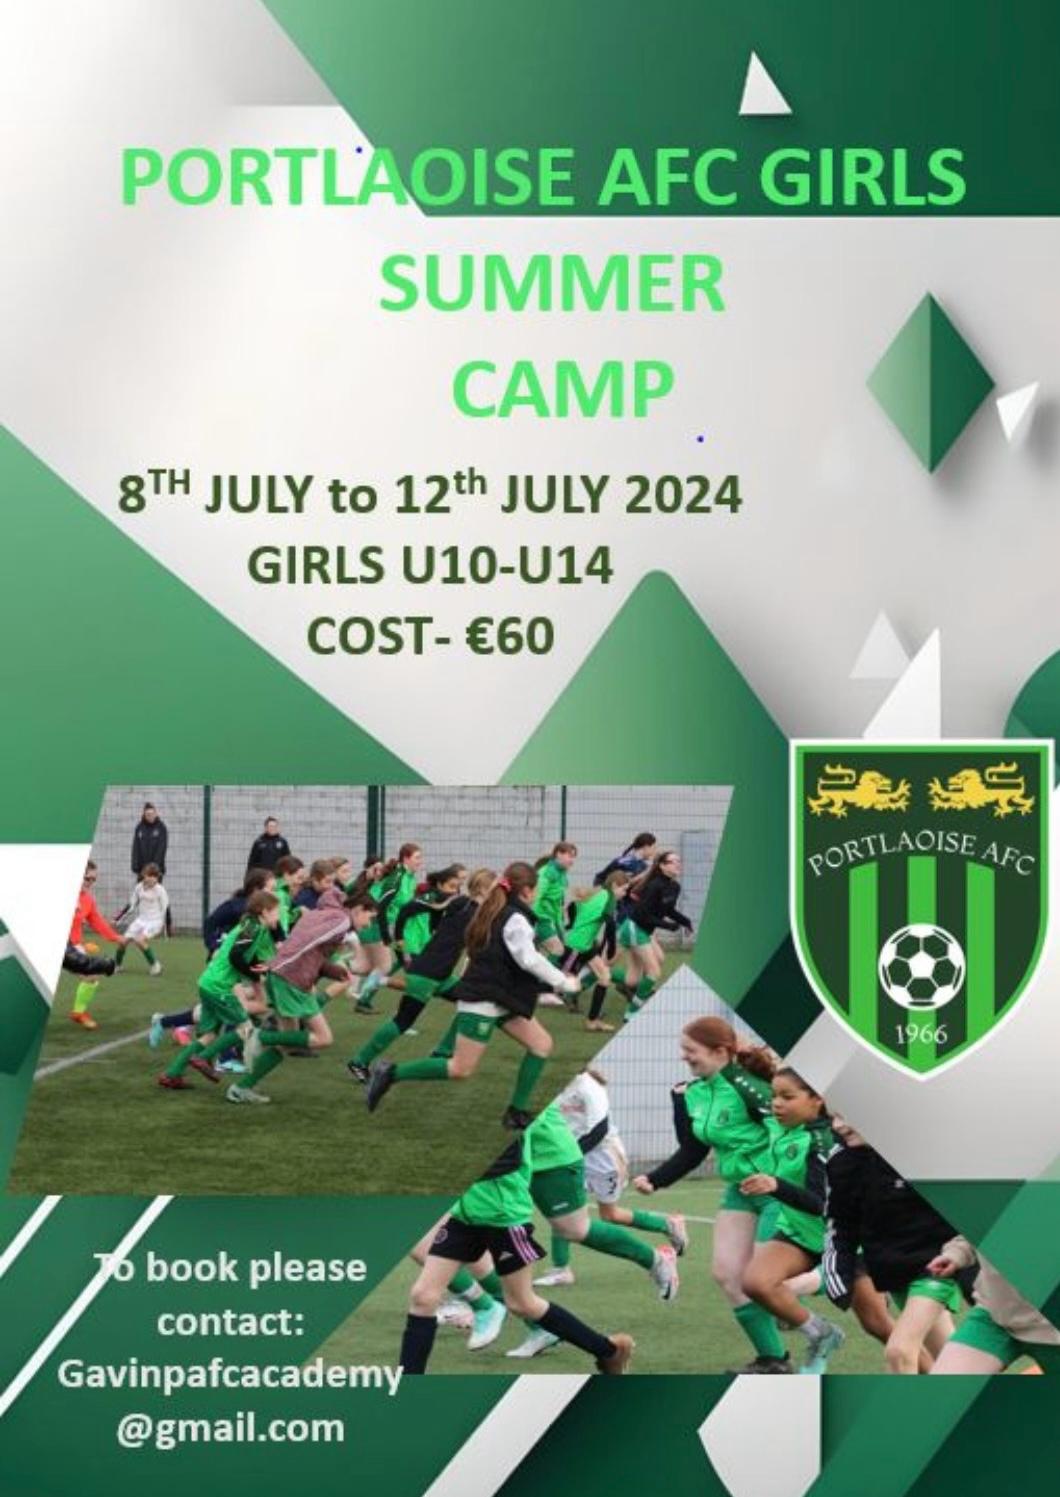 Portlaoise AFC Girls Summer Camp as part of the LaoisToday Summer Camp 2024 listing